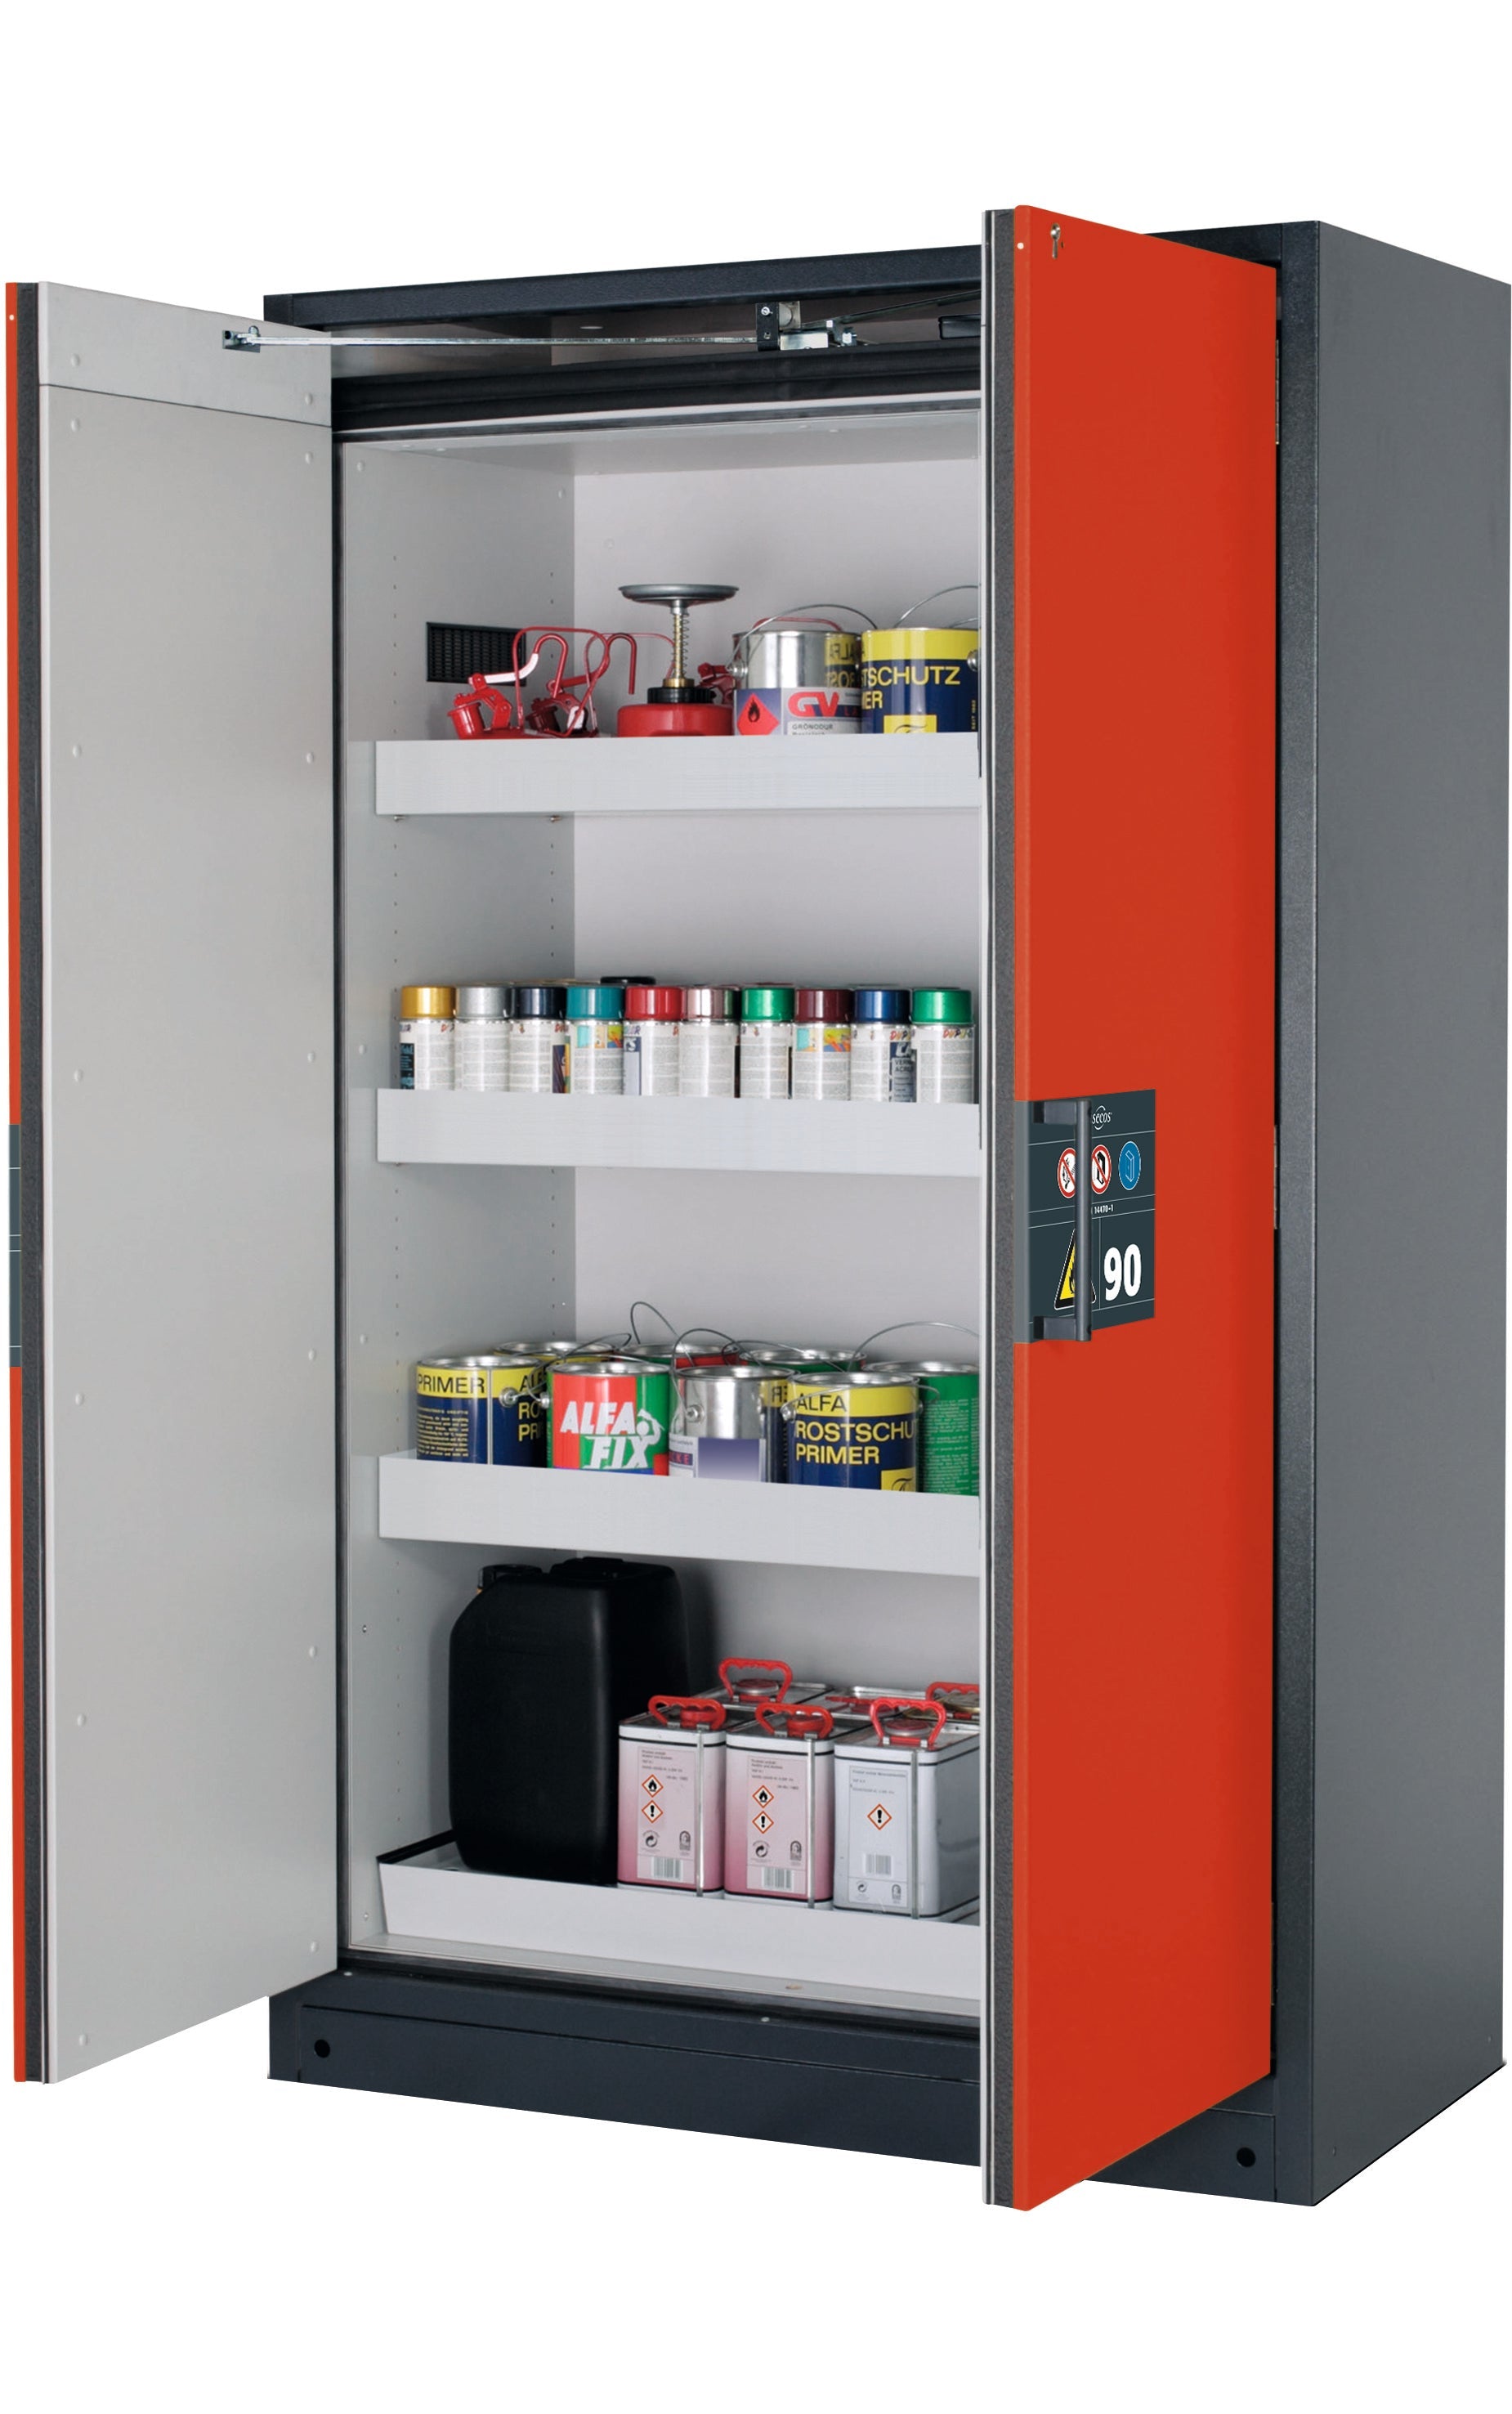 Type 90 safety storage cabinet Q-PEGASUS-90 model Q90.195.120.WDAC in traffic red RAL 3020 with 3x tray shelf (standard) (sheet steel),